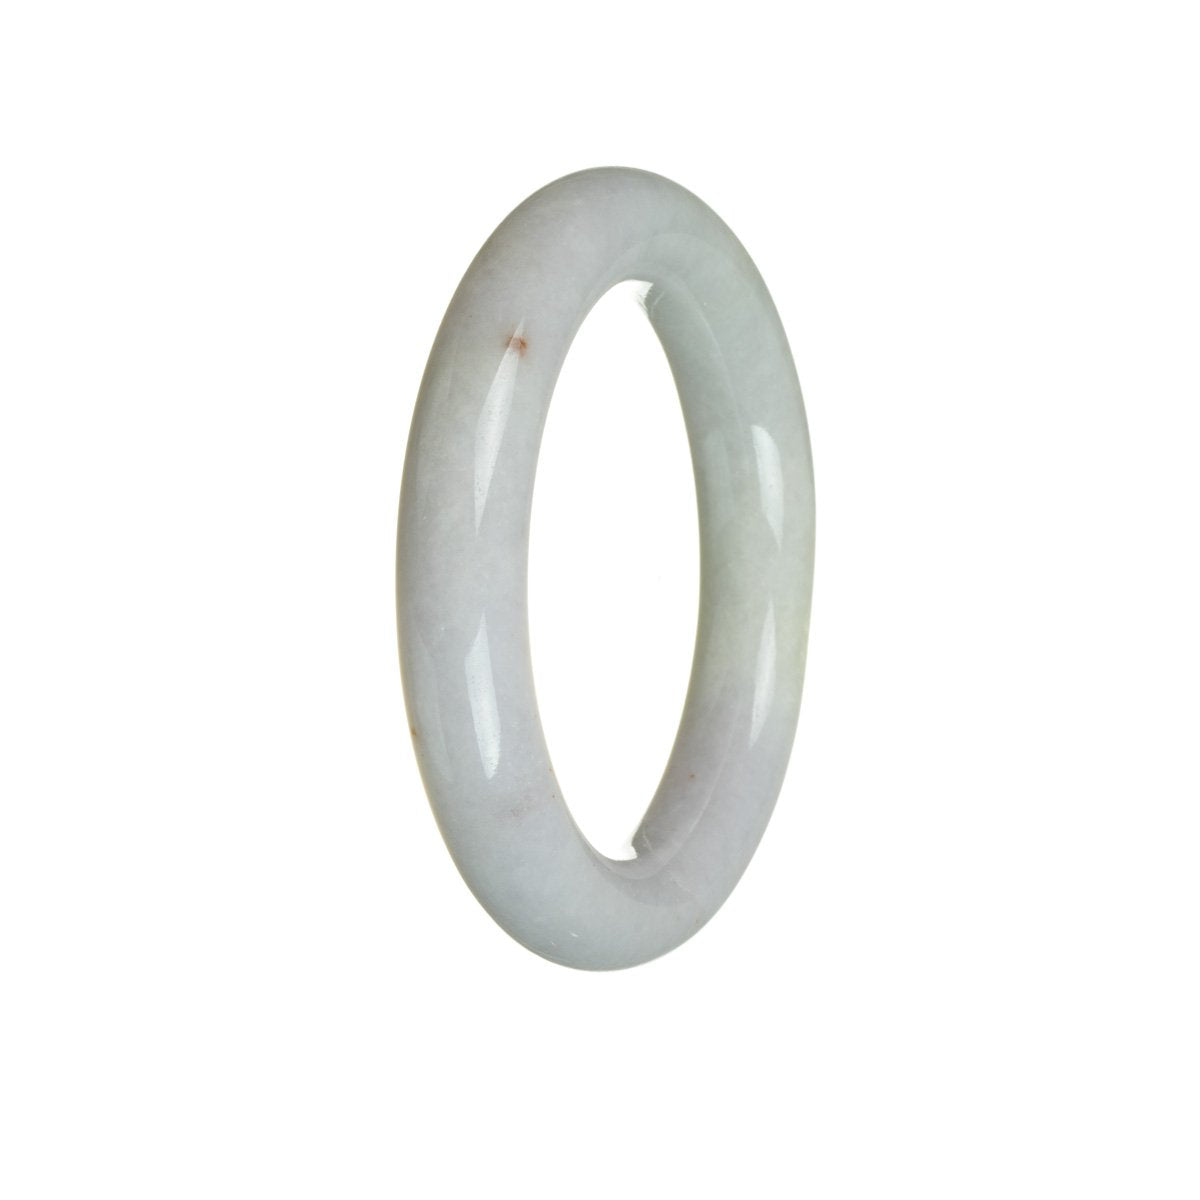 Genuine Grade A Lavender with Pale Green Traditional Jade Bangle Bracelet - 54mm Round